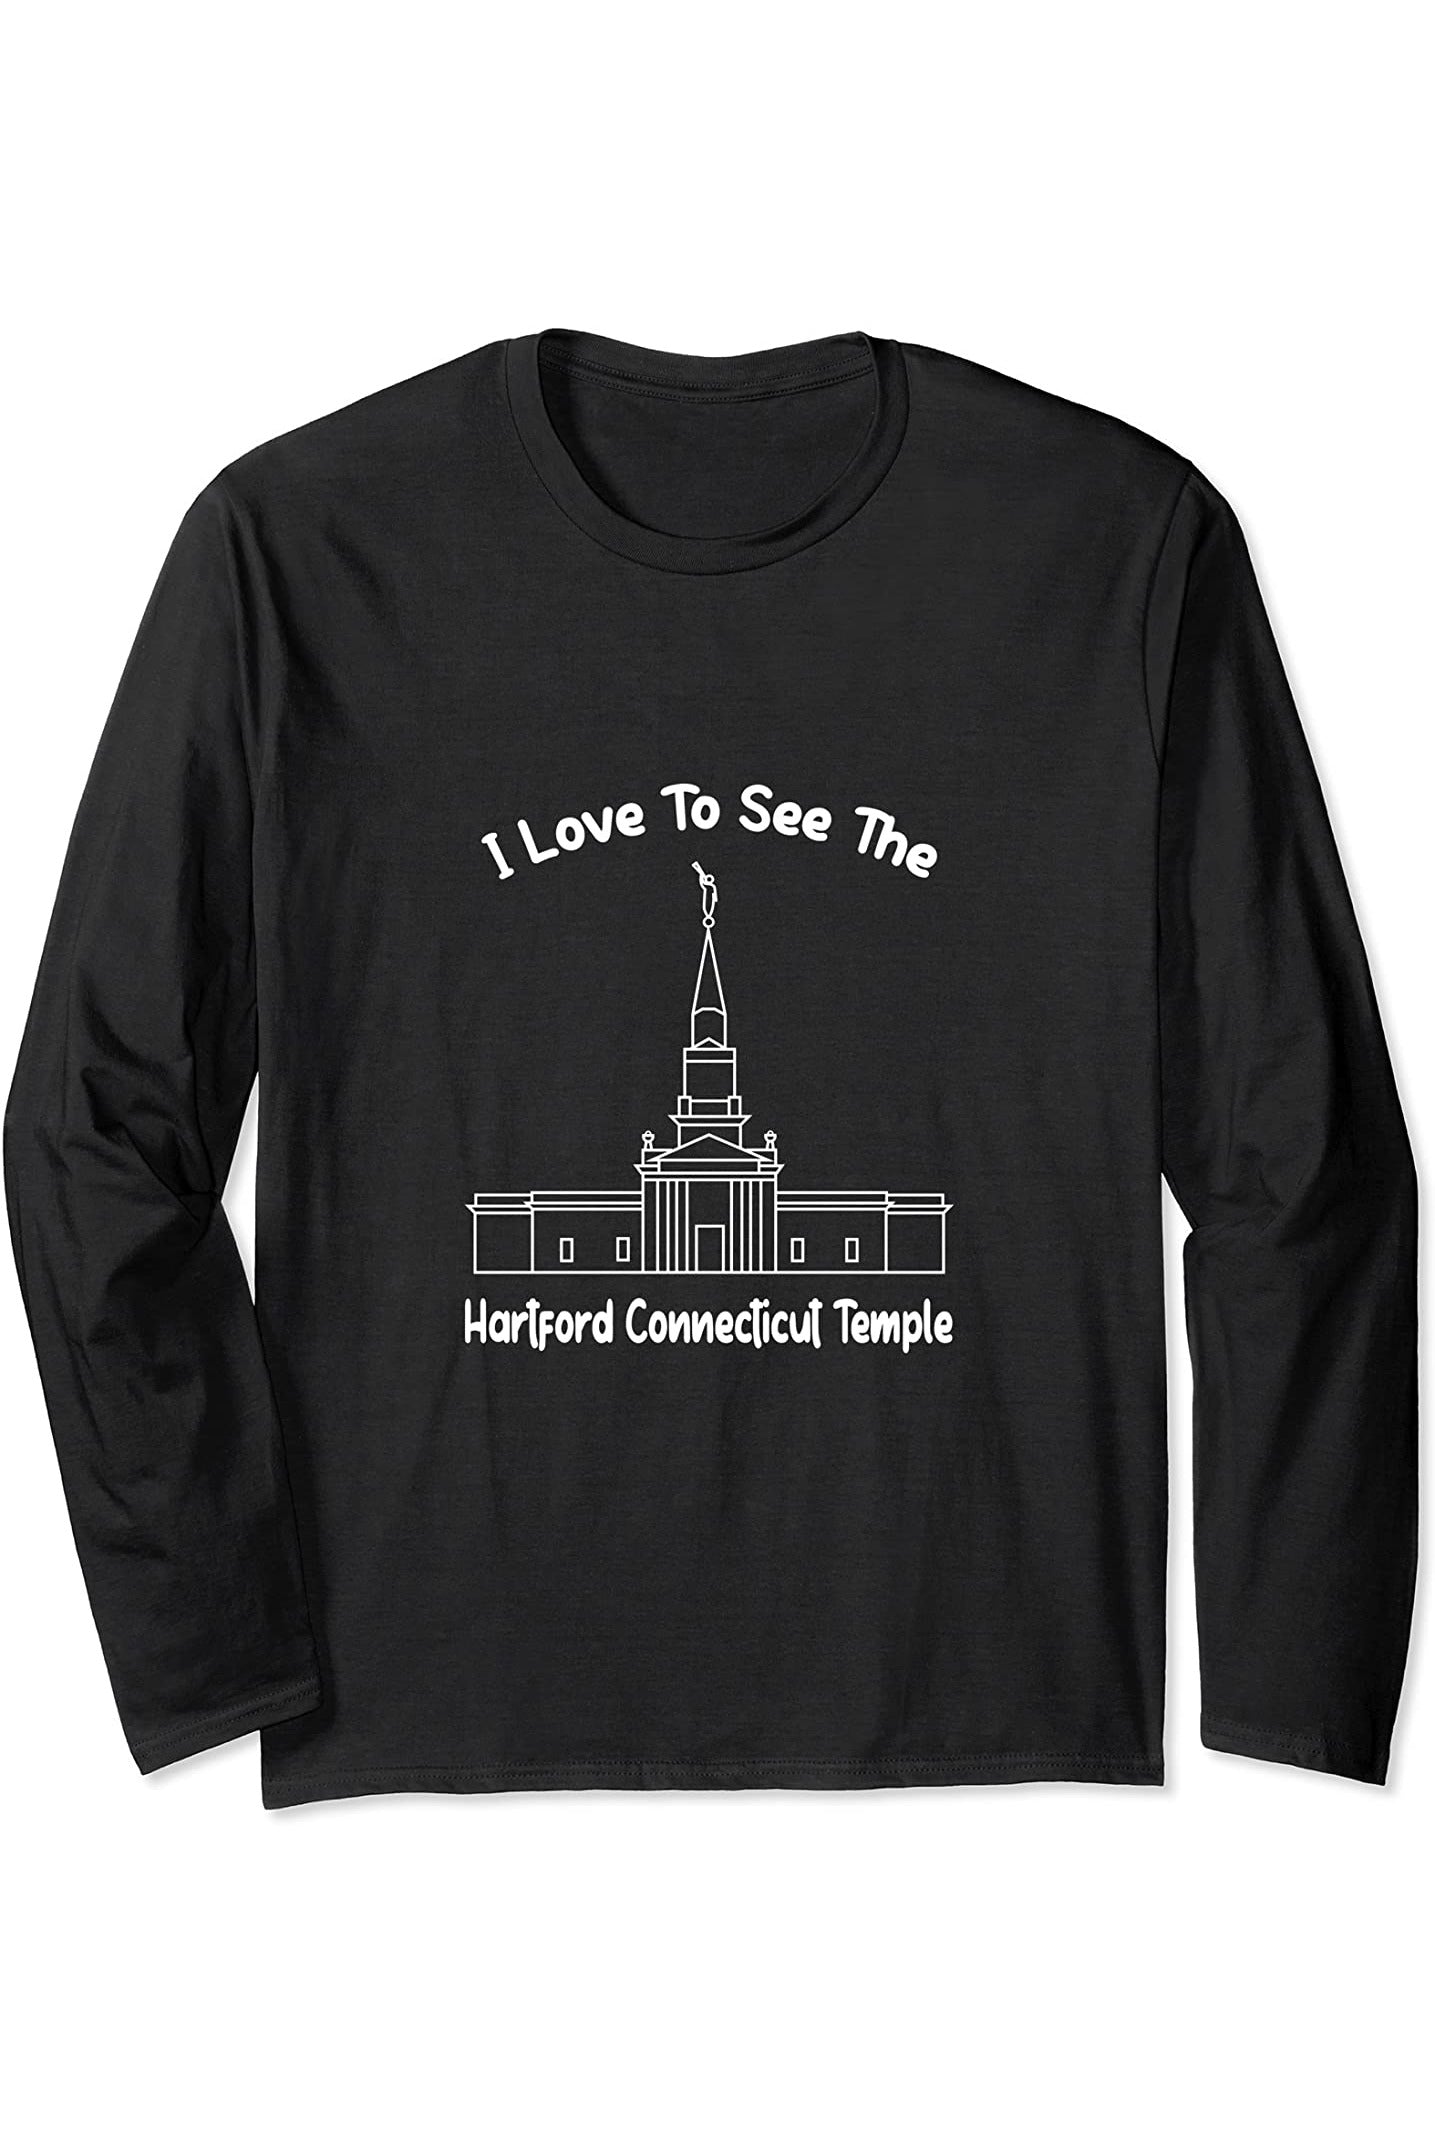 Hartford Connecticut Temple Long Sleeve T-Shirt - Primary Style (English) US